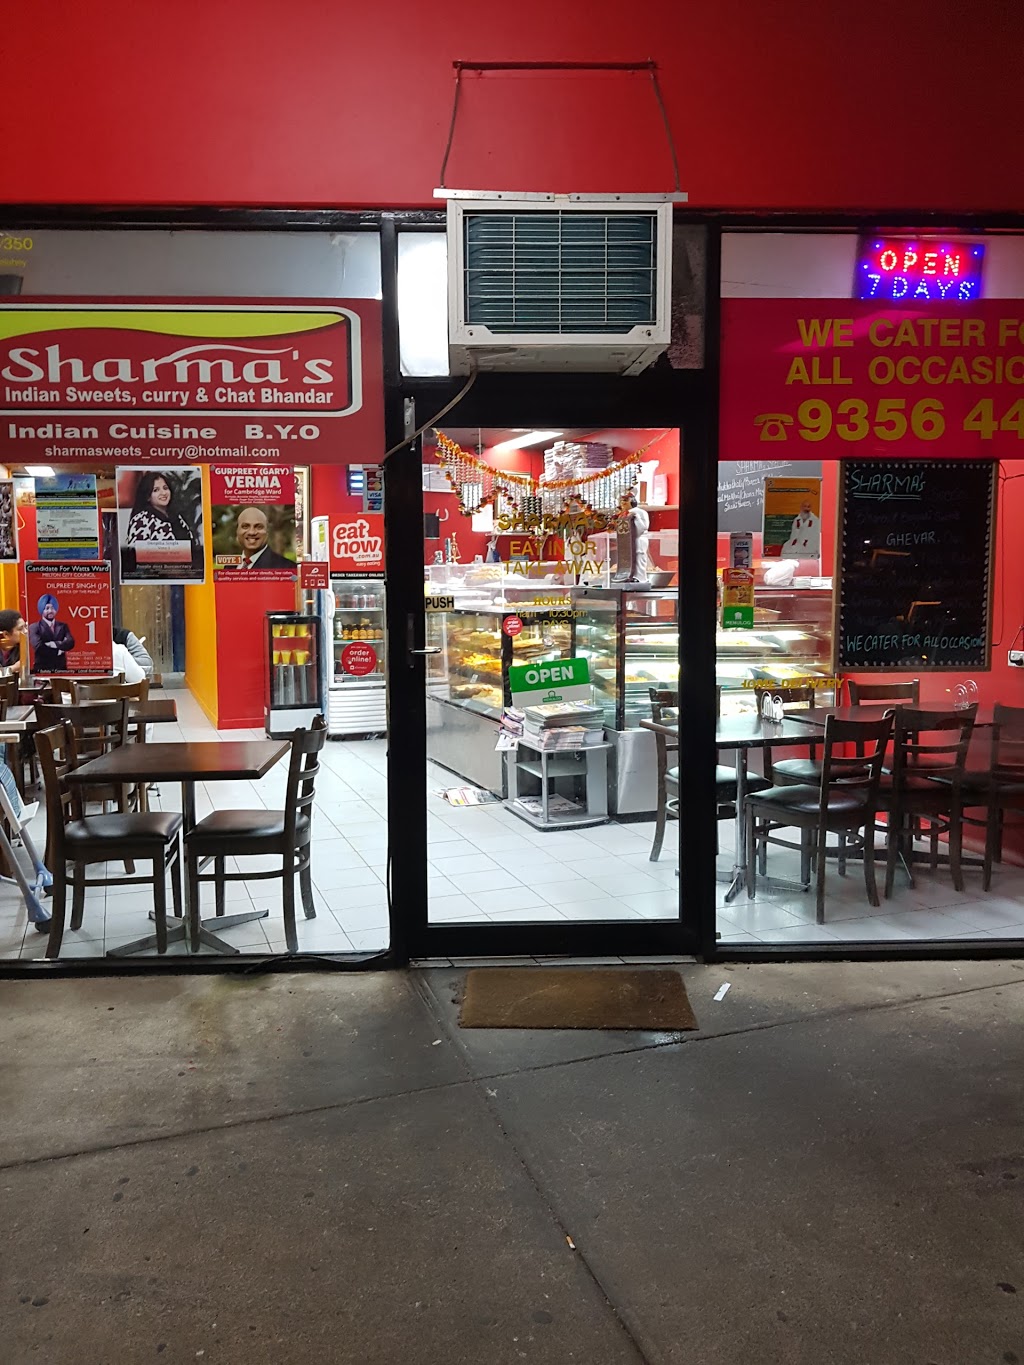 Sharmas Indian Sweet and Curry House | 4/350 Taylors Rd, Delahey VIC 3037, Australia | Phone: (03) 9356 4400